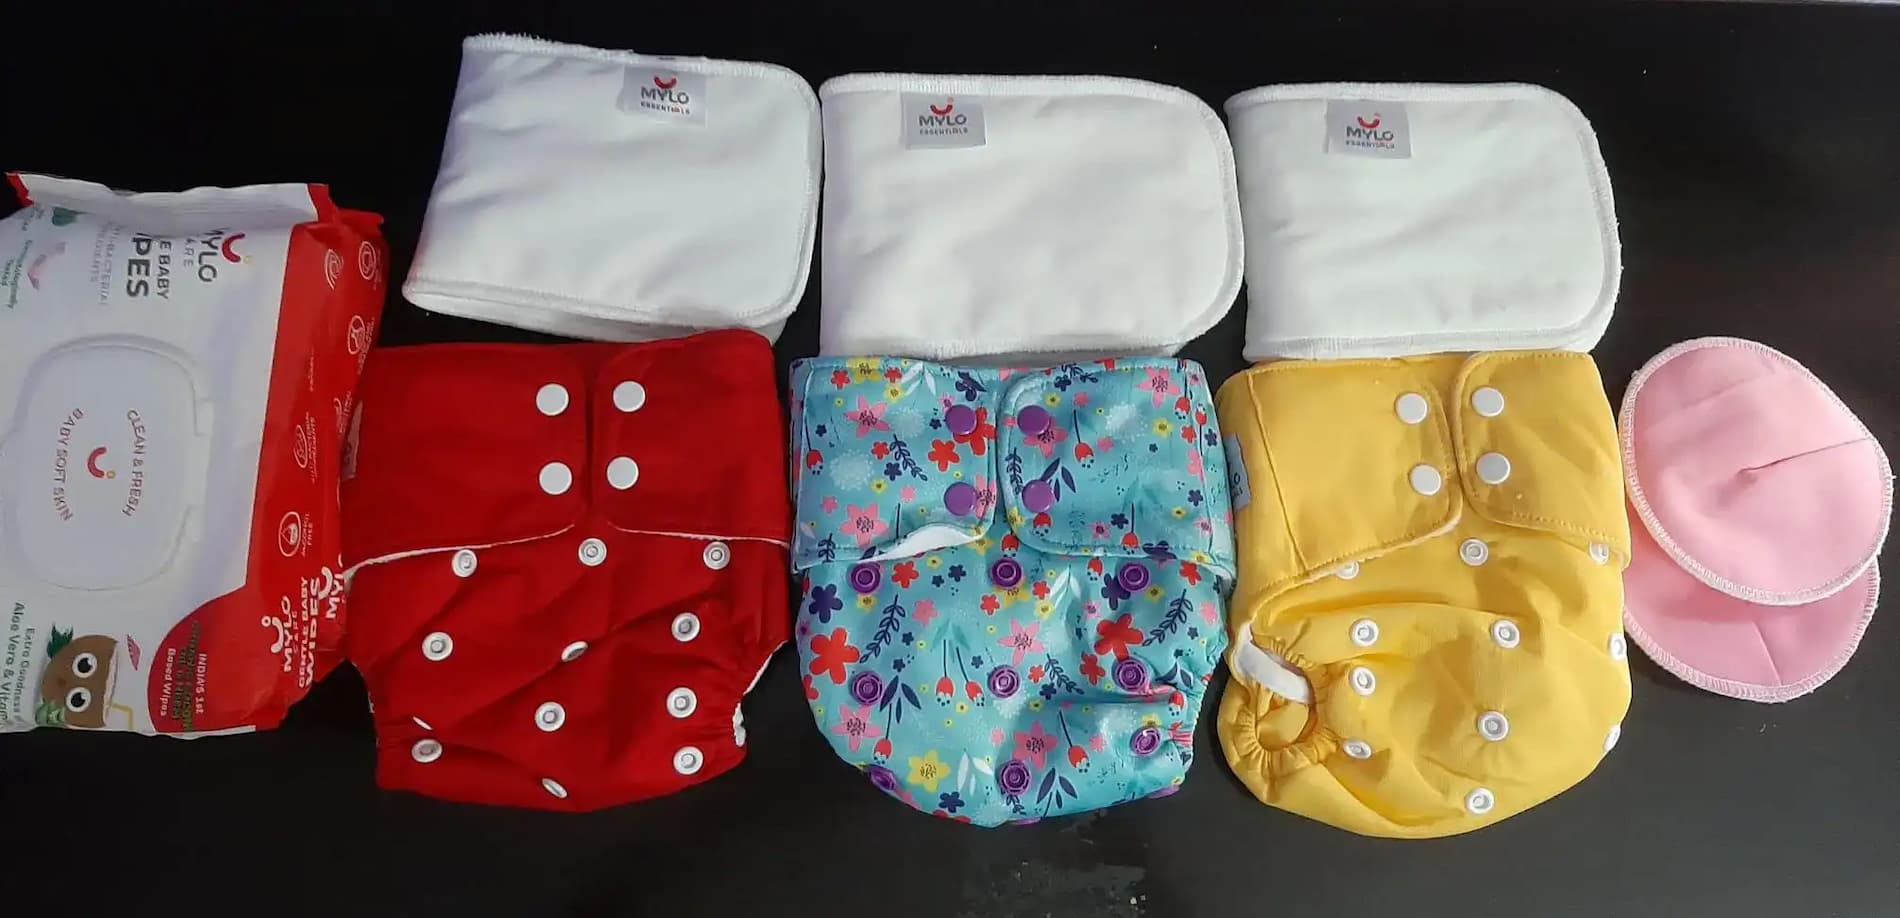 Adjustable Washable & Reusable Cloth Diaper With Dry Feel, Absorbent Insert Pad (3M-3Y) | Oeko-Tex Certified | Prevents Rashes - 1 Solid + 2 Heart Print - Pack of 3